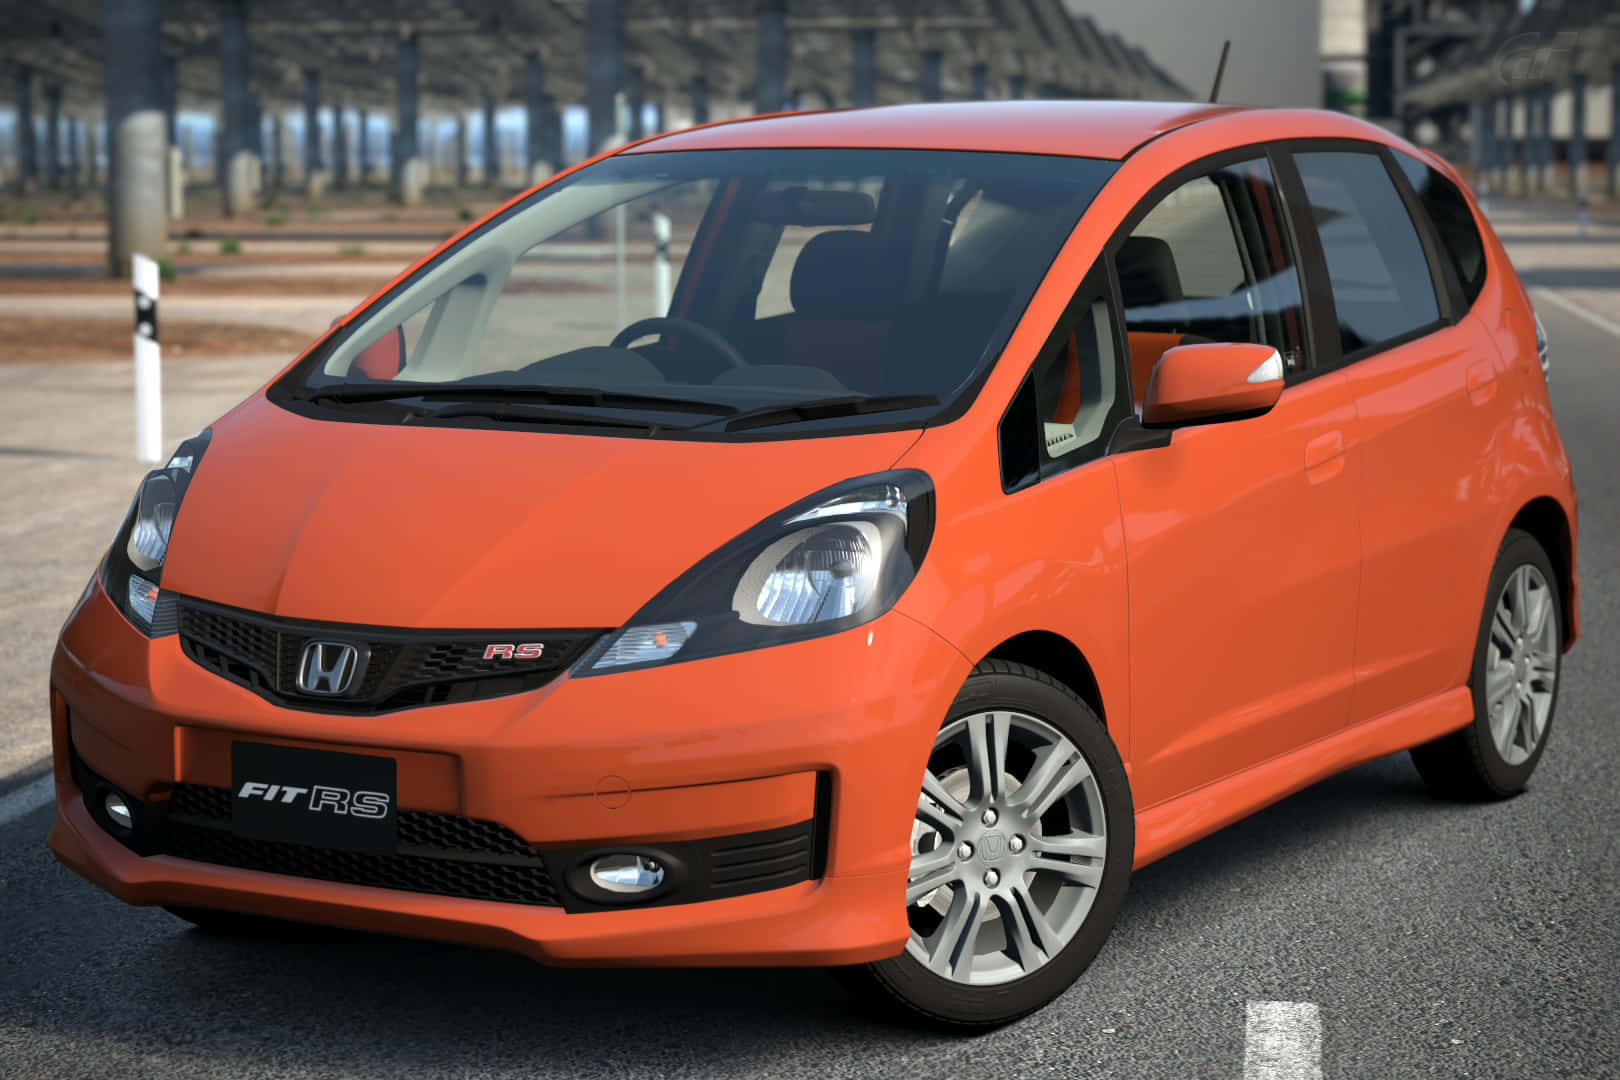 Sleek and Stylish Honda Fit on the Road Wallpaper